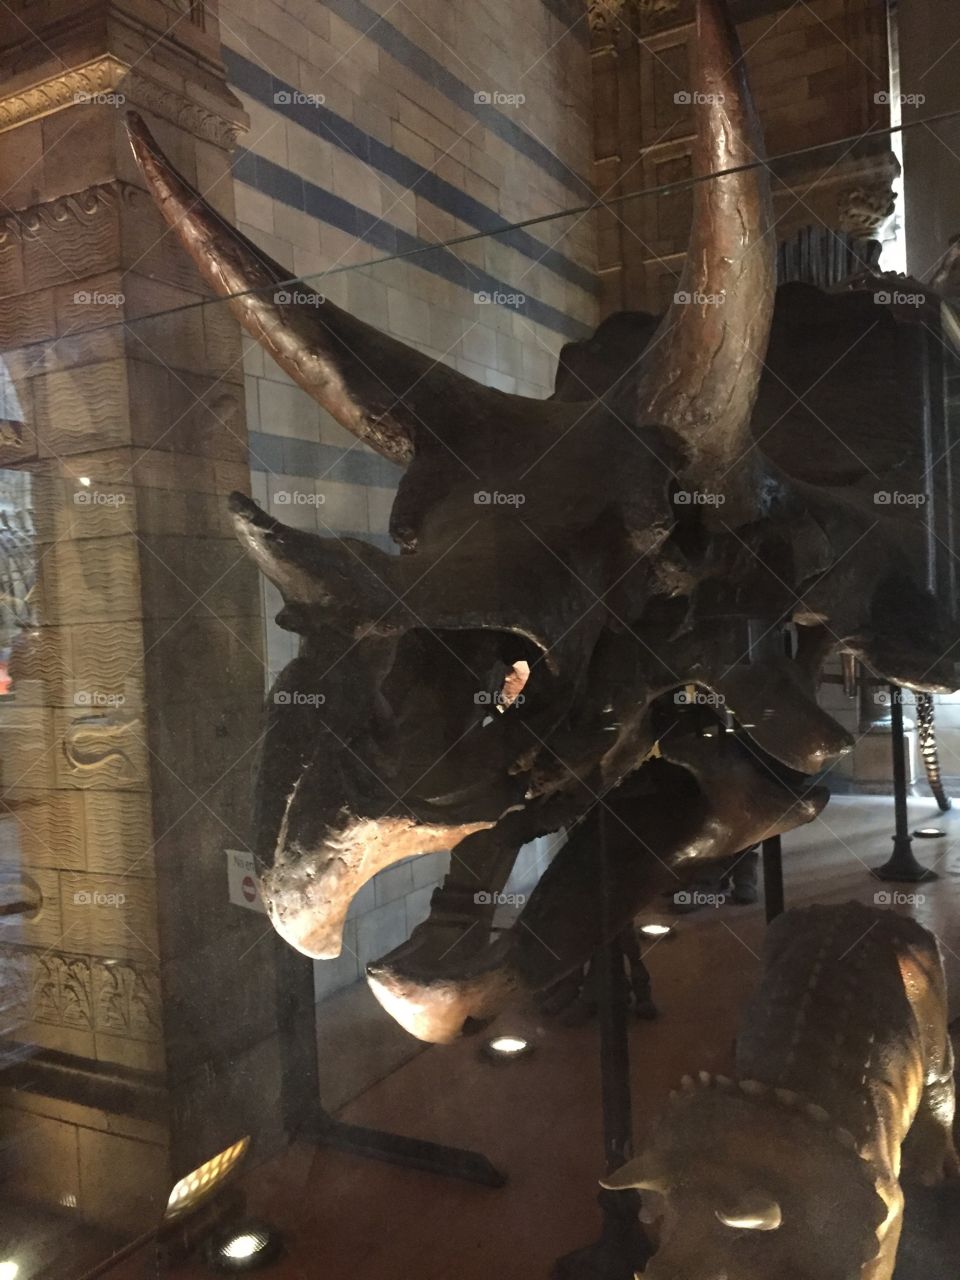 Triceratops. Triceratops at the Natural History Museum in London 